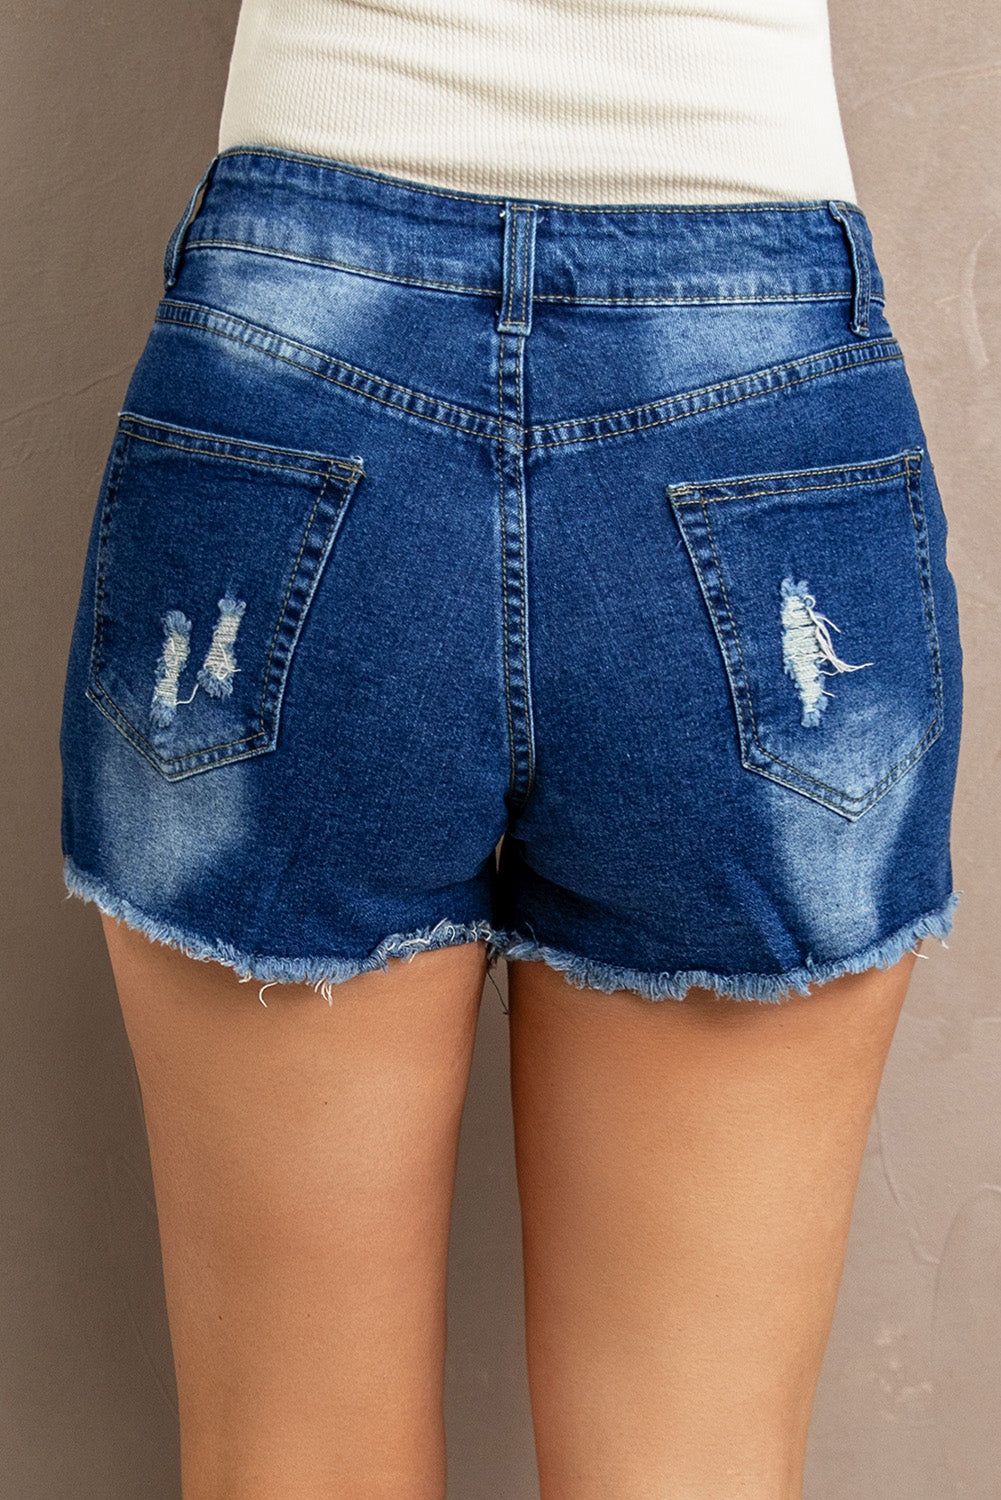 Load image into Gallery viewer, Spliced Lace Distressed Denim Shorts
